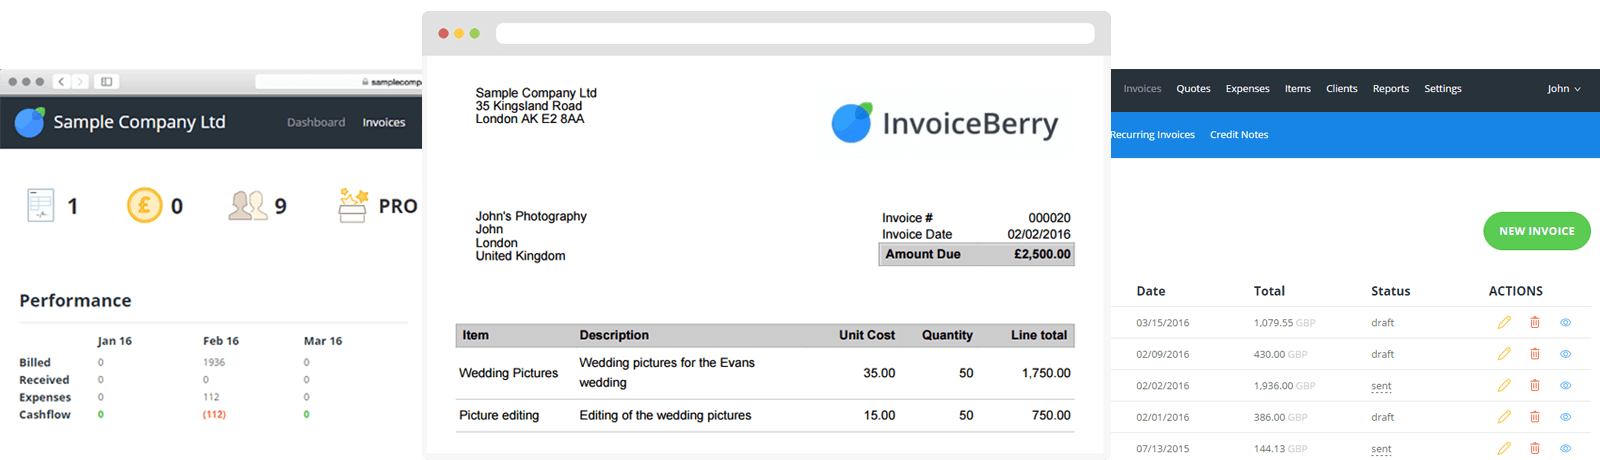 InvoiceBerry online invoicing software